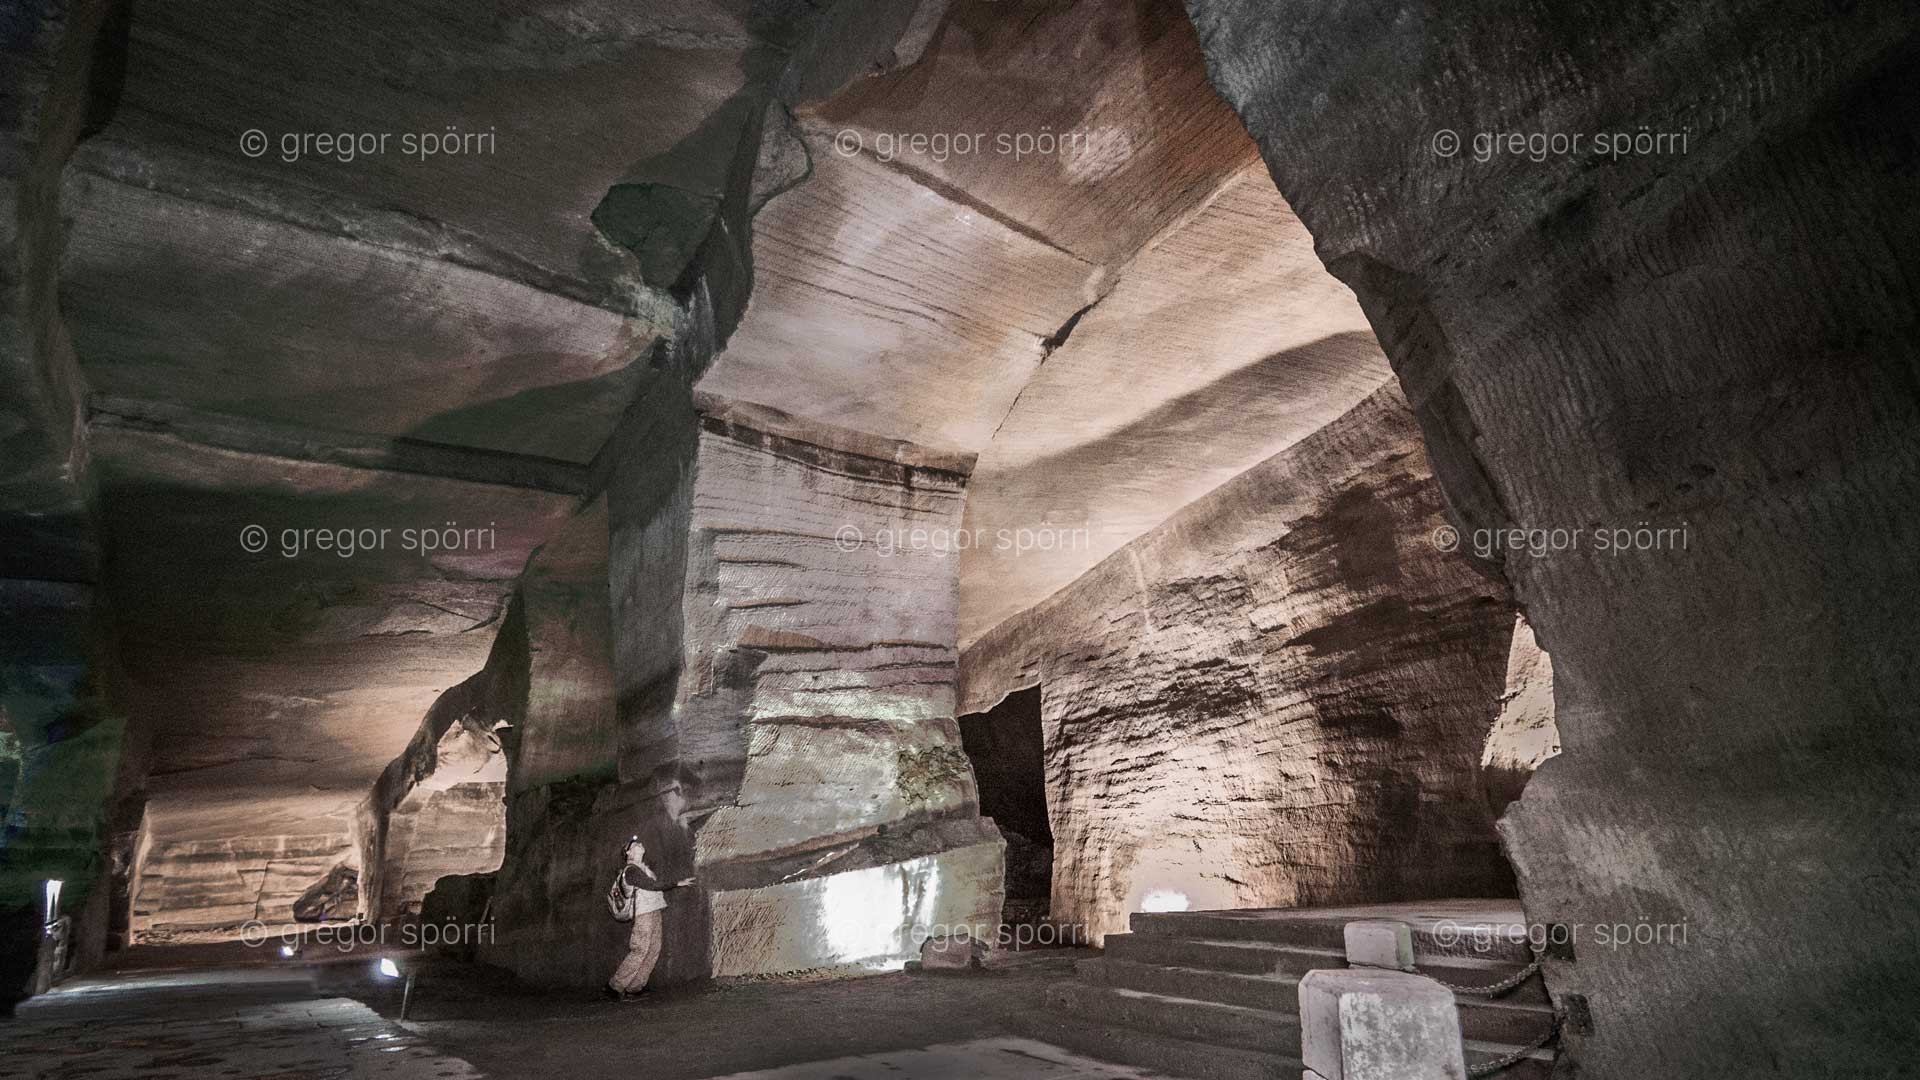 The China Grottoes of Huang Shan (Blumenberg): Gregor Spörri explores the entrance area of the bizarre underworld.